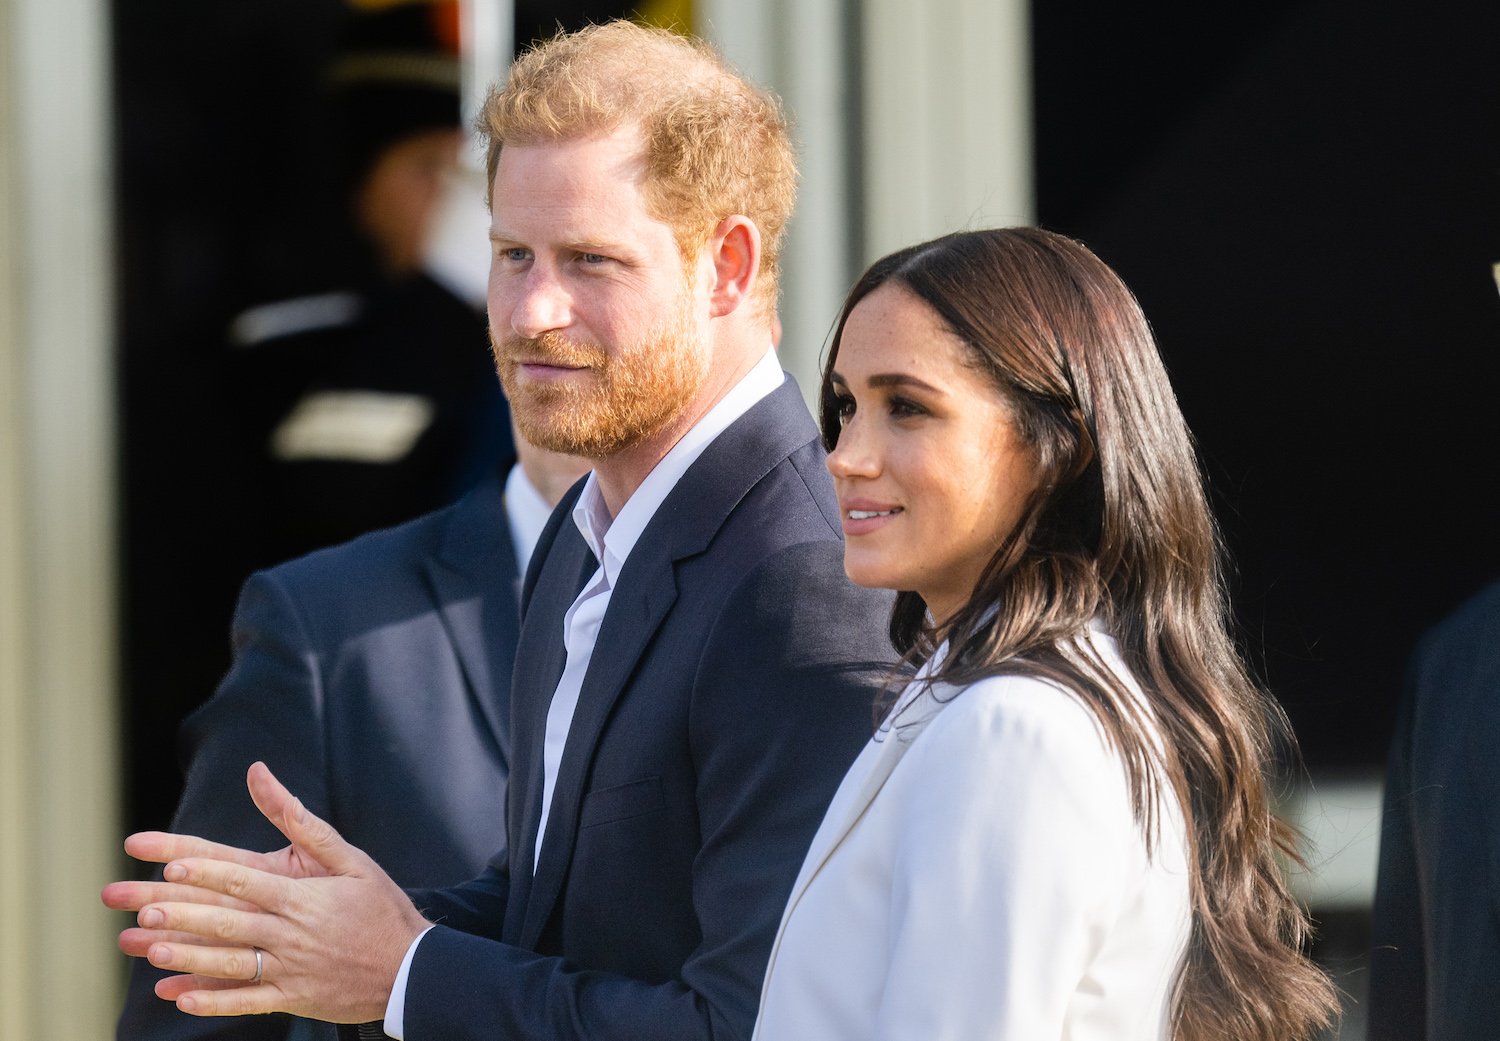 Prince Harry wears a dark jacket and Meghan Markle wears a white pant suit during their appearance at the Invictus Games